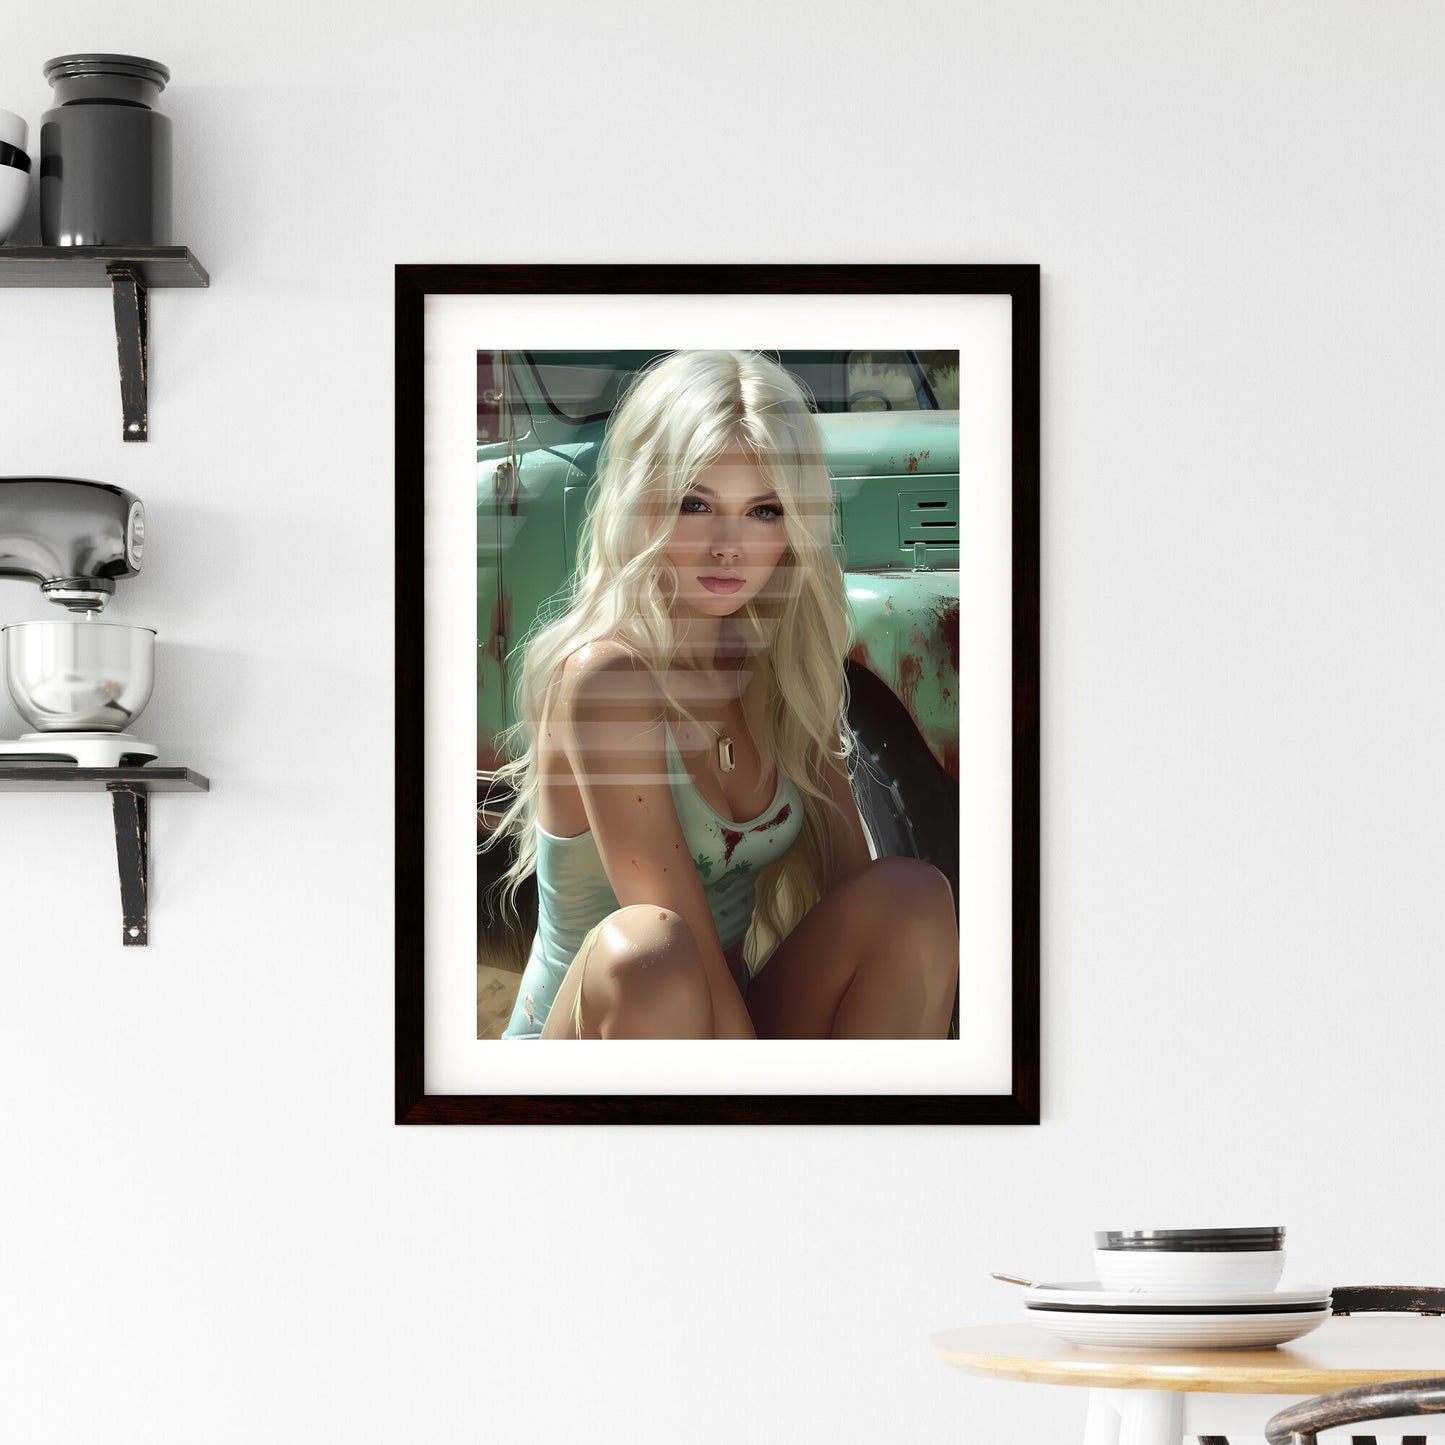 Sitting pin up factory worker girl,looking amazing - Art print of a woman sitting on a truck Default Title